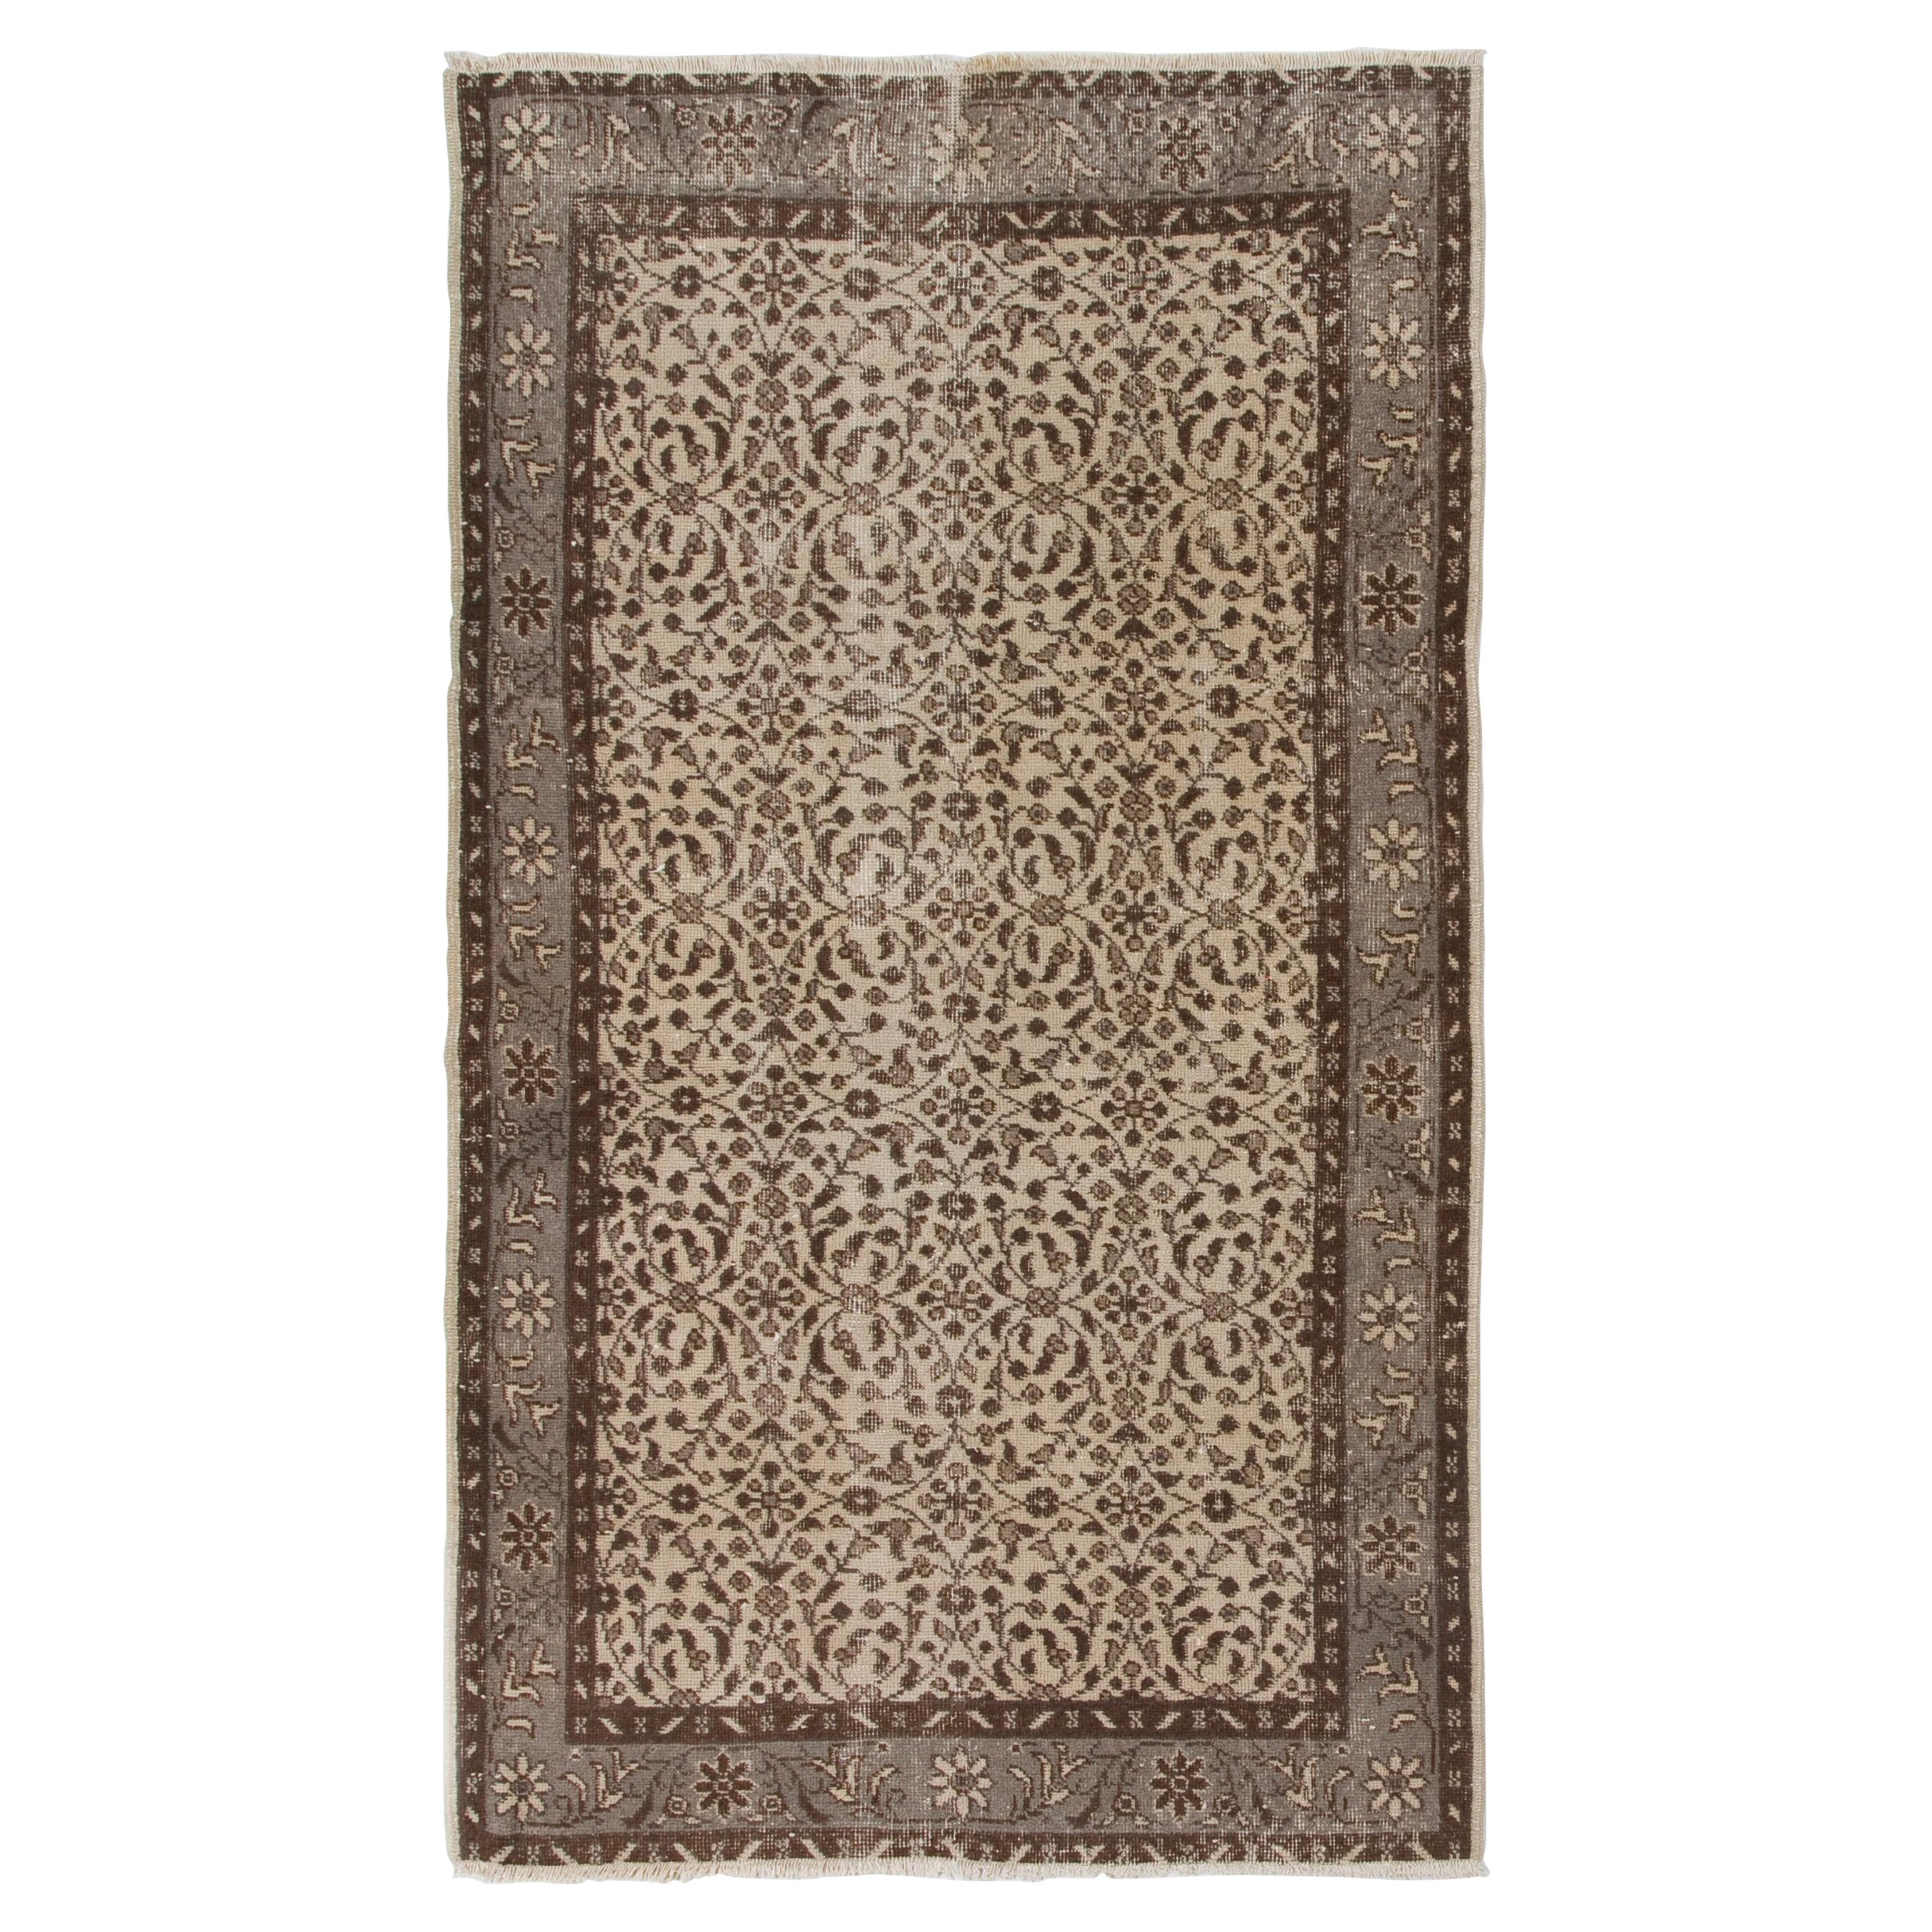 Handmade Vintage Turkish Oushak Accent Rug with All-Over Floral Design 4x6.8 ft